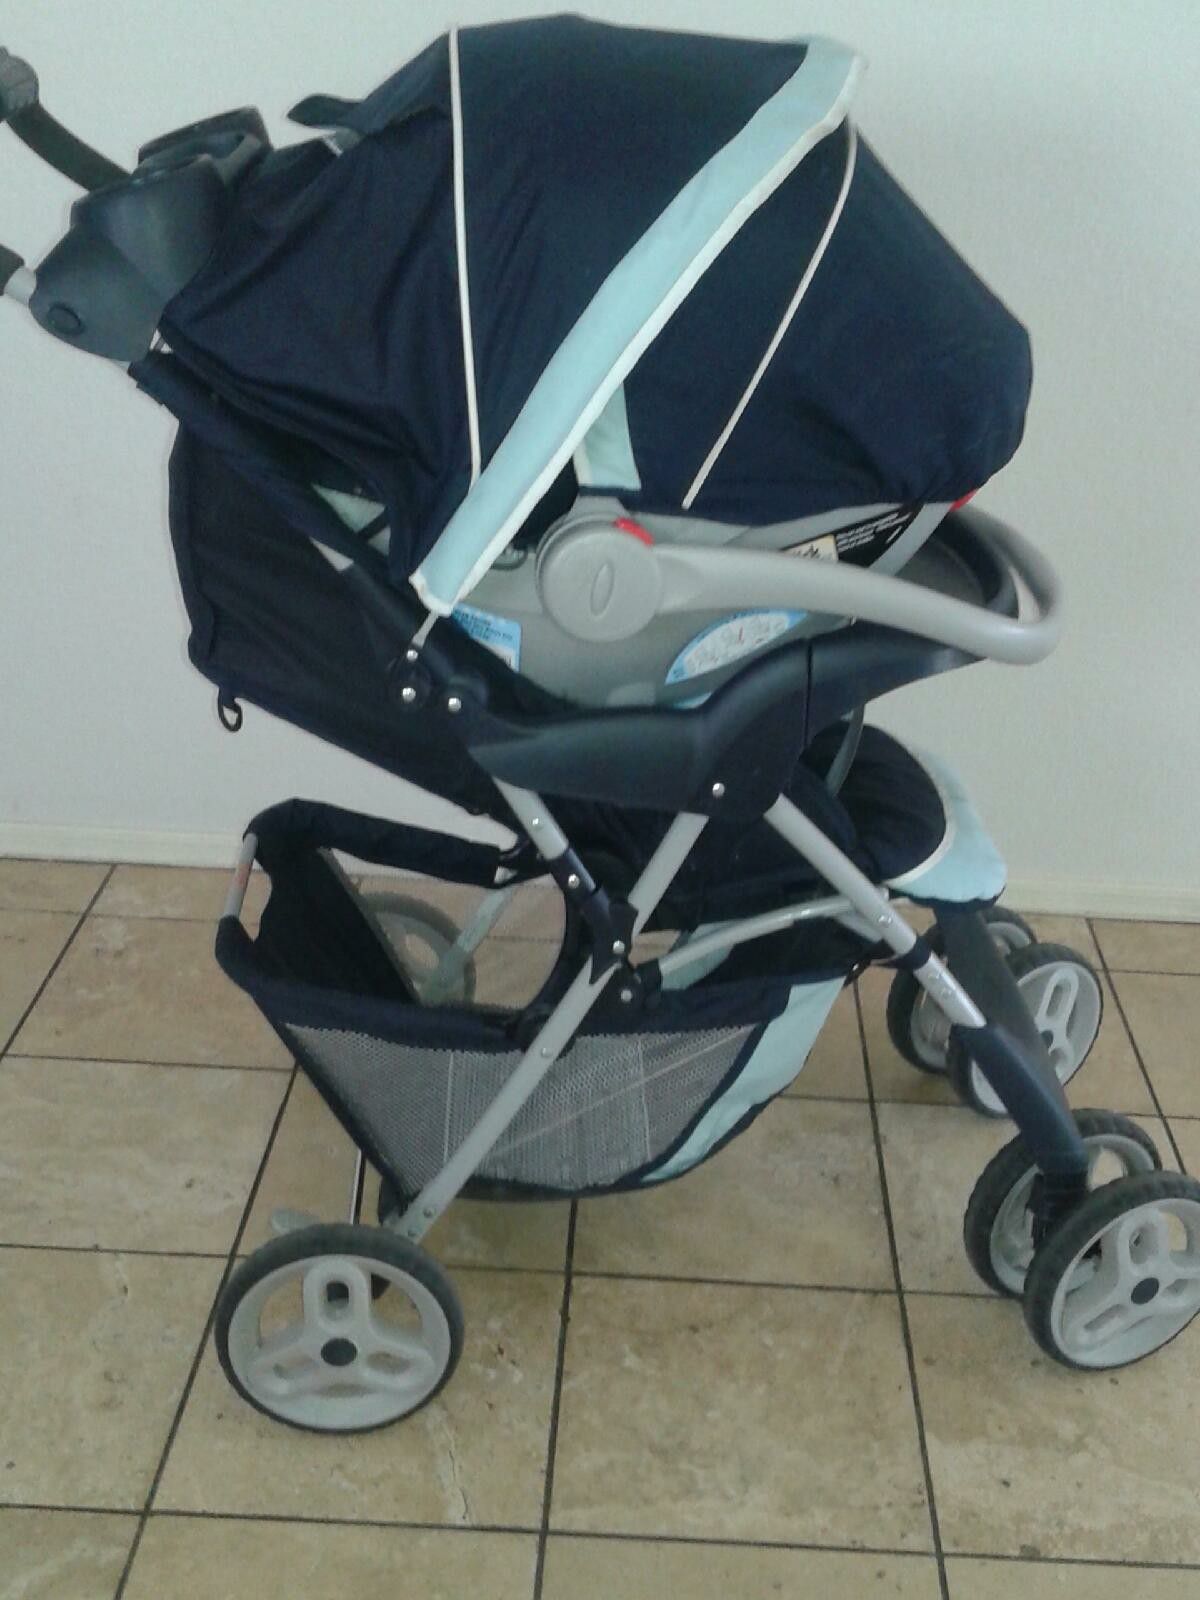 Graco stroller with matching car seat